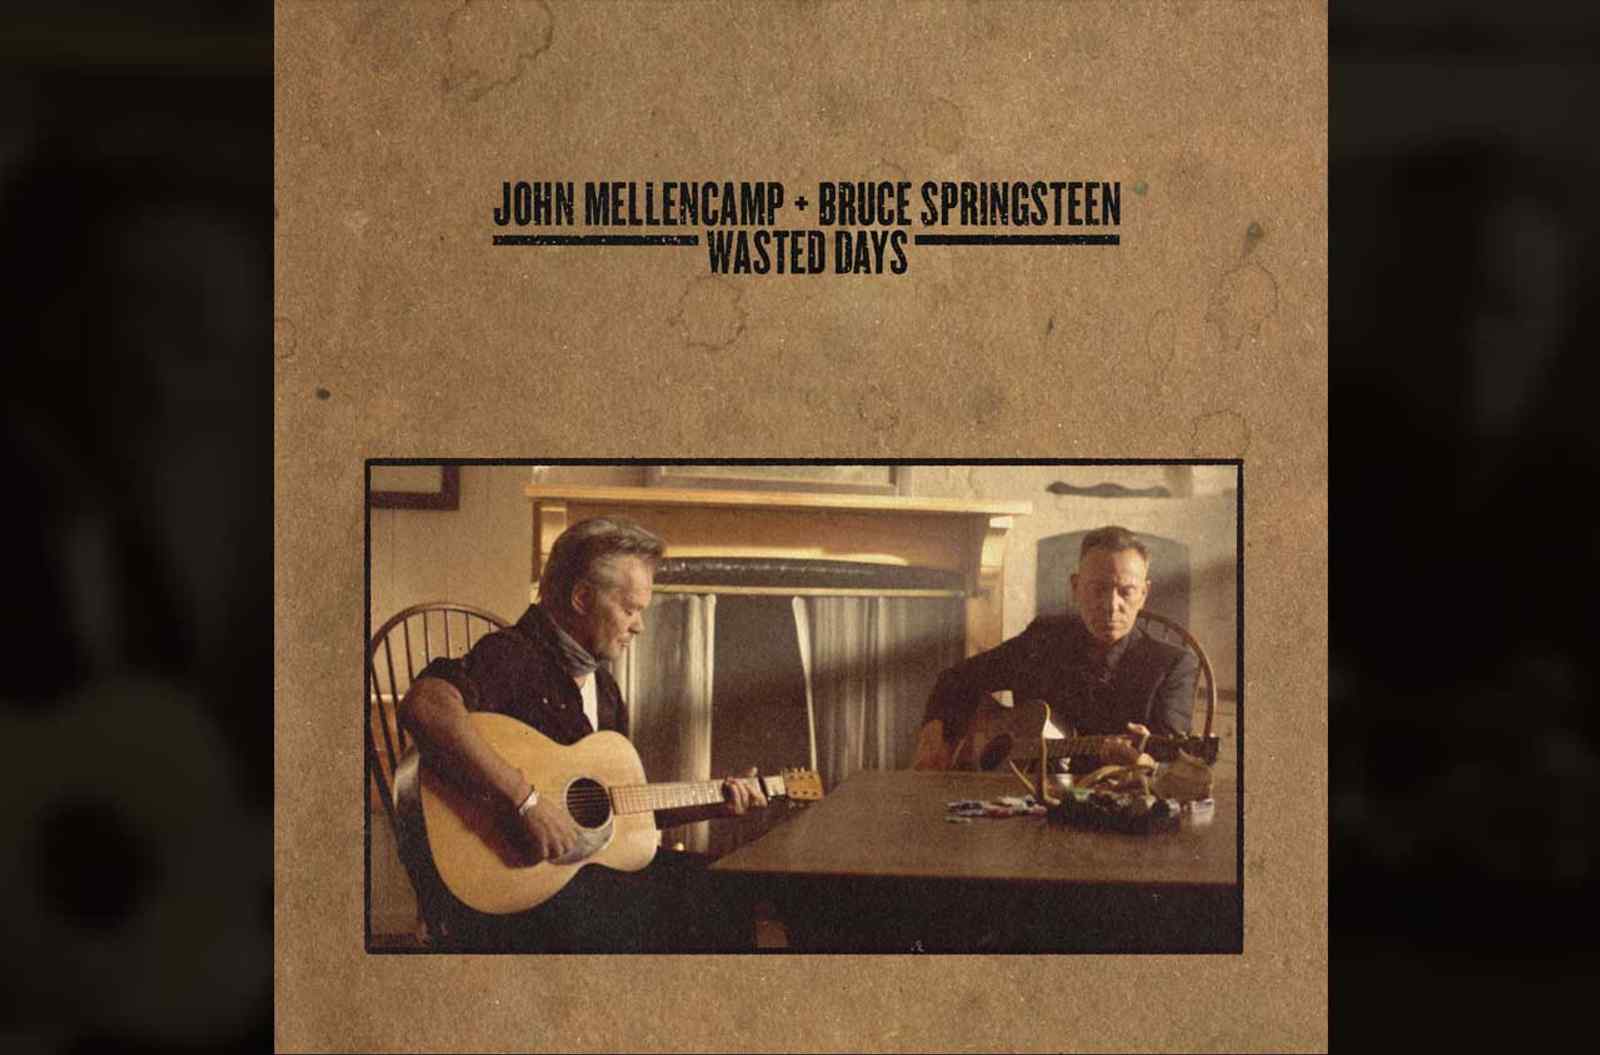 John Mellencamp and Bruce Springsteen Duet For The First Time On "Wasted Days"